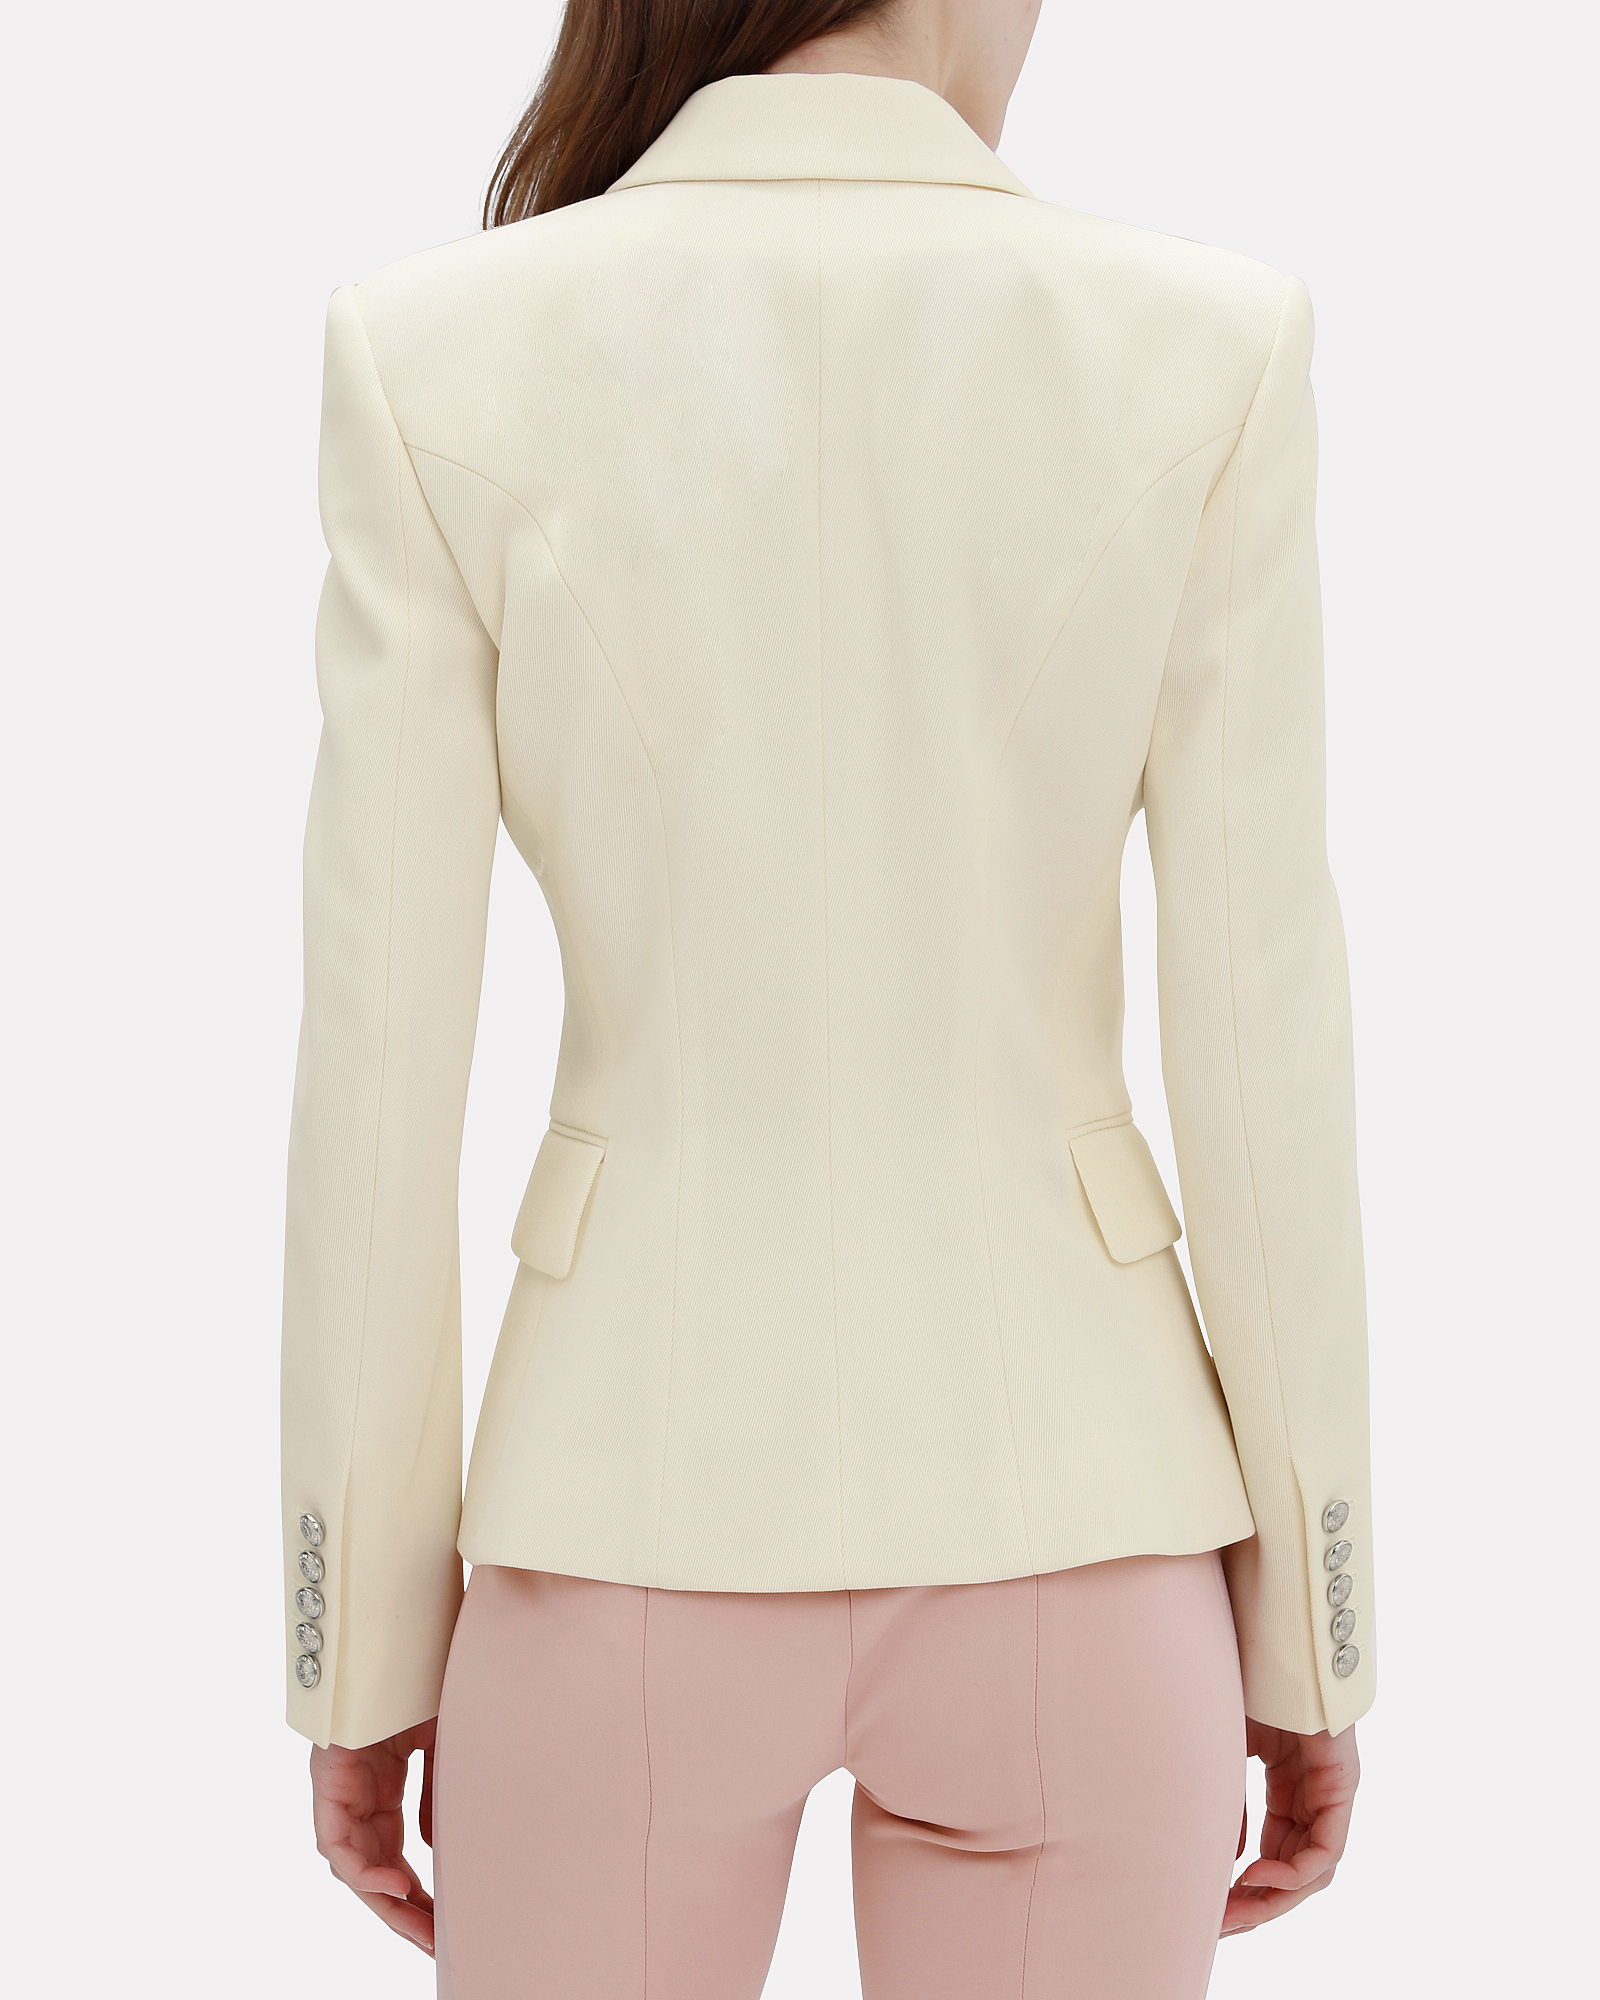 Classic Double-Breasted Ivory Blazer | INTERMIX®